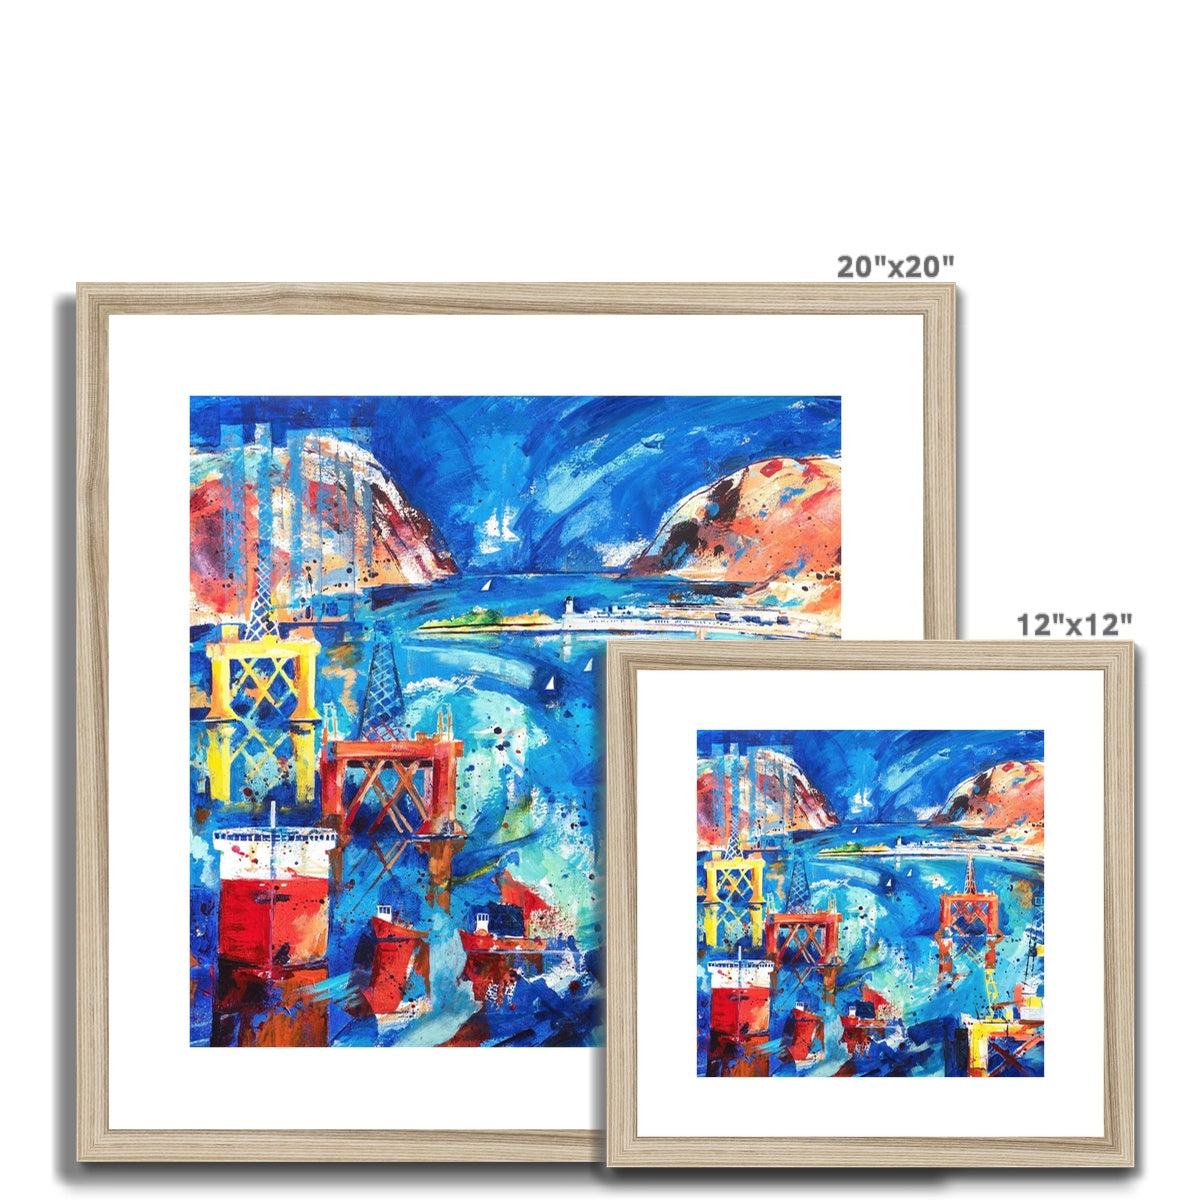 Resting Rigs, Cromarty Firth Framed & Mounted Print